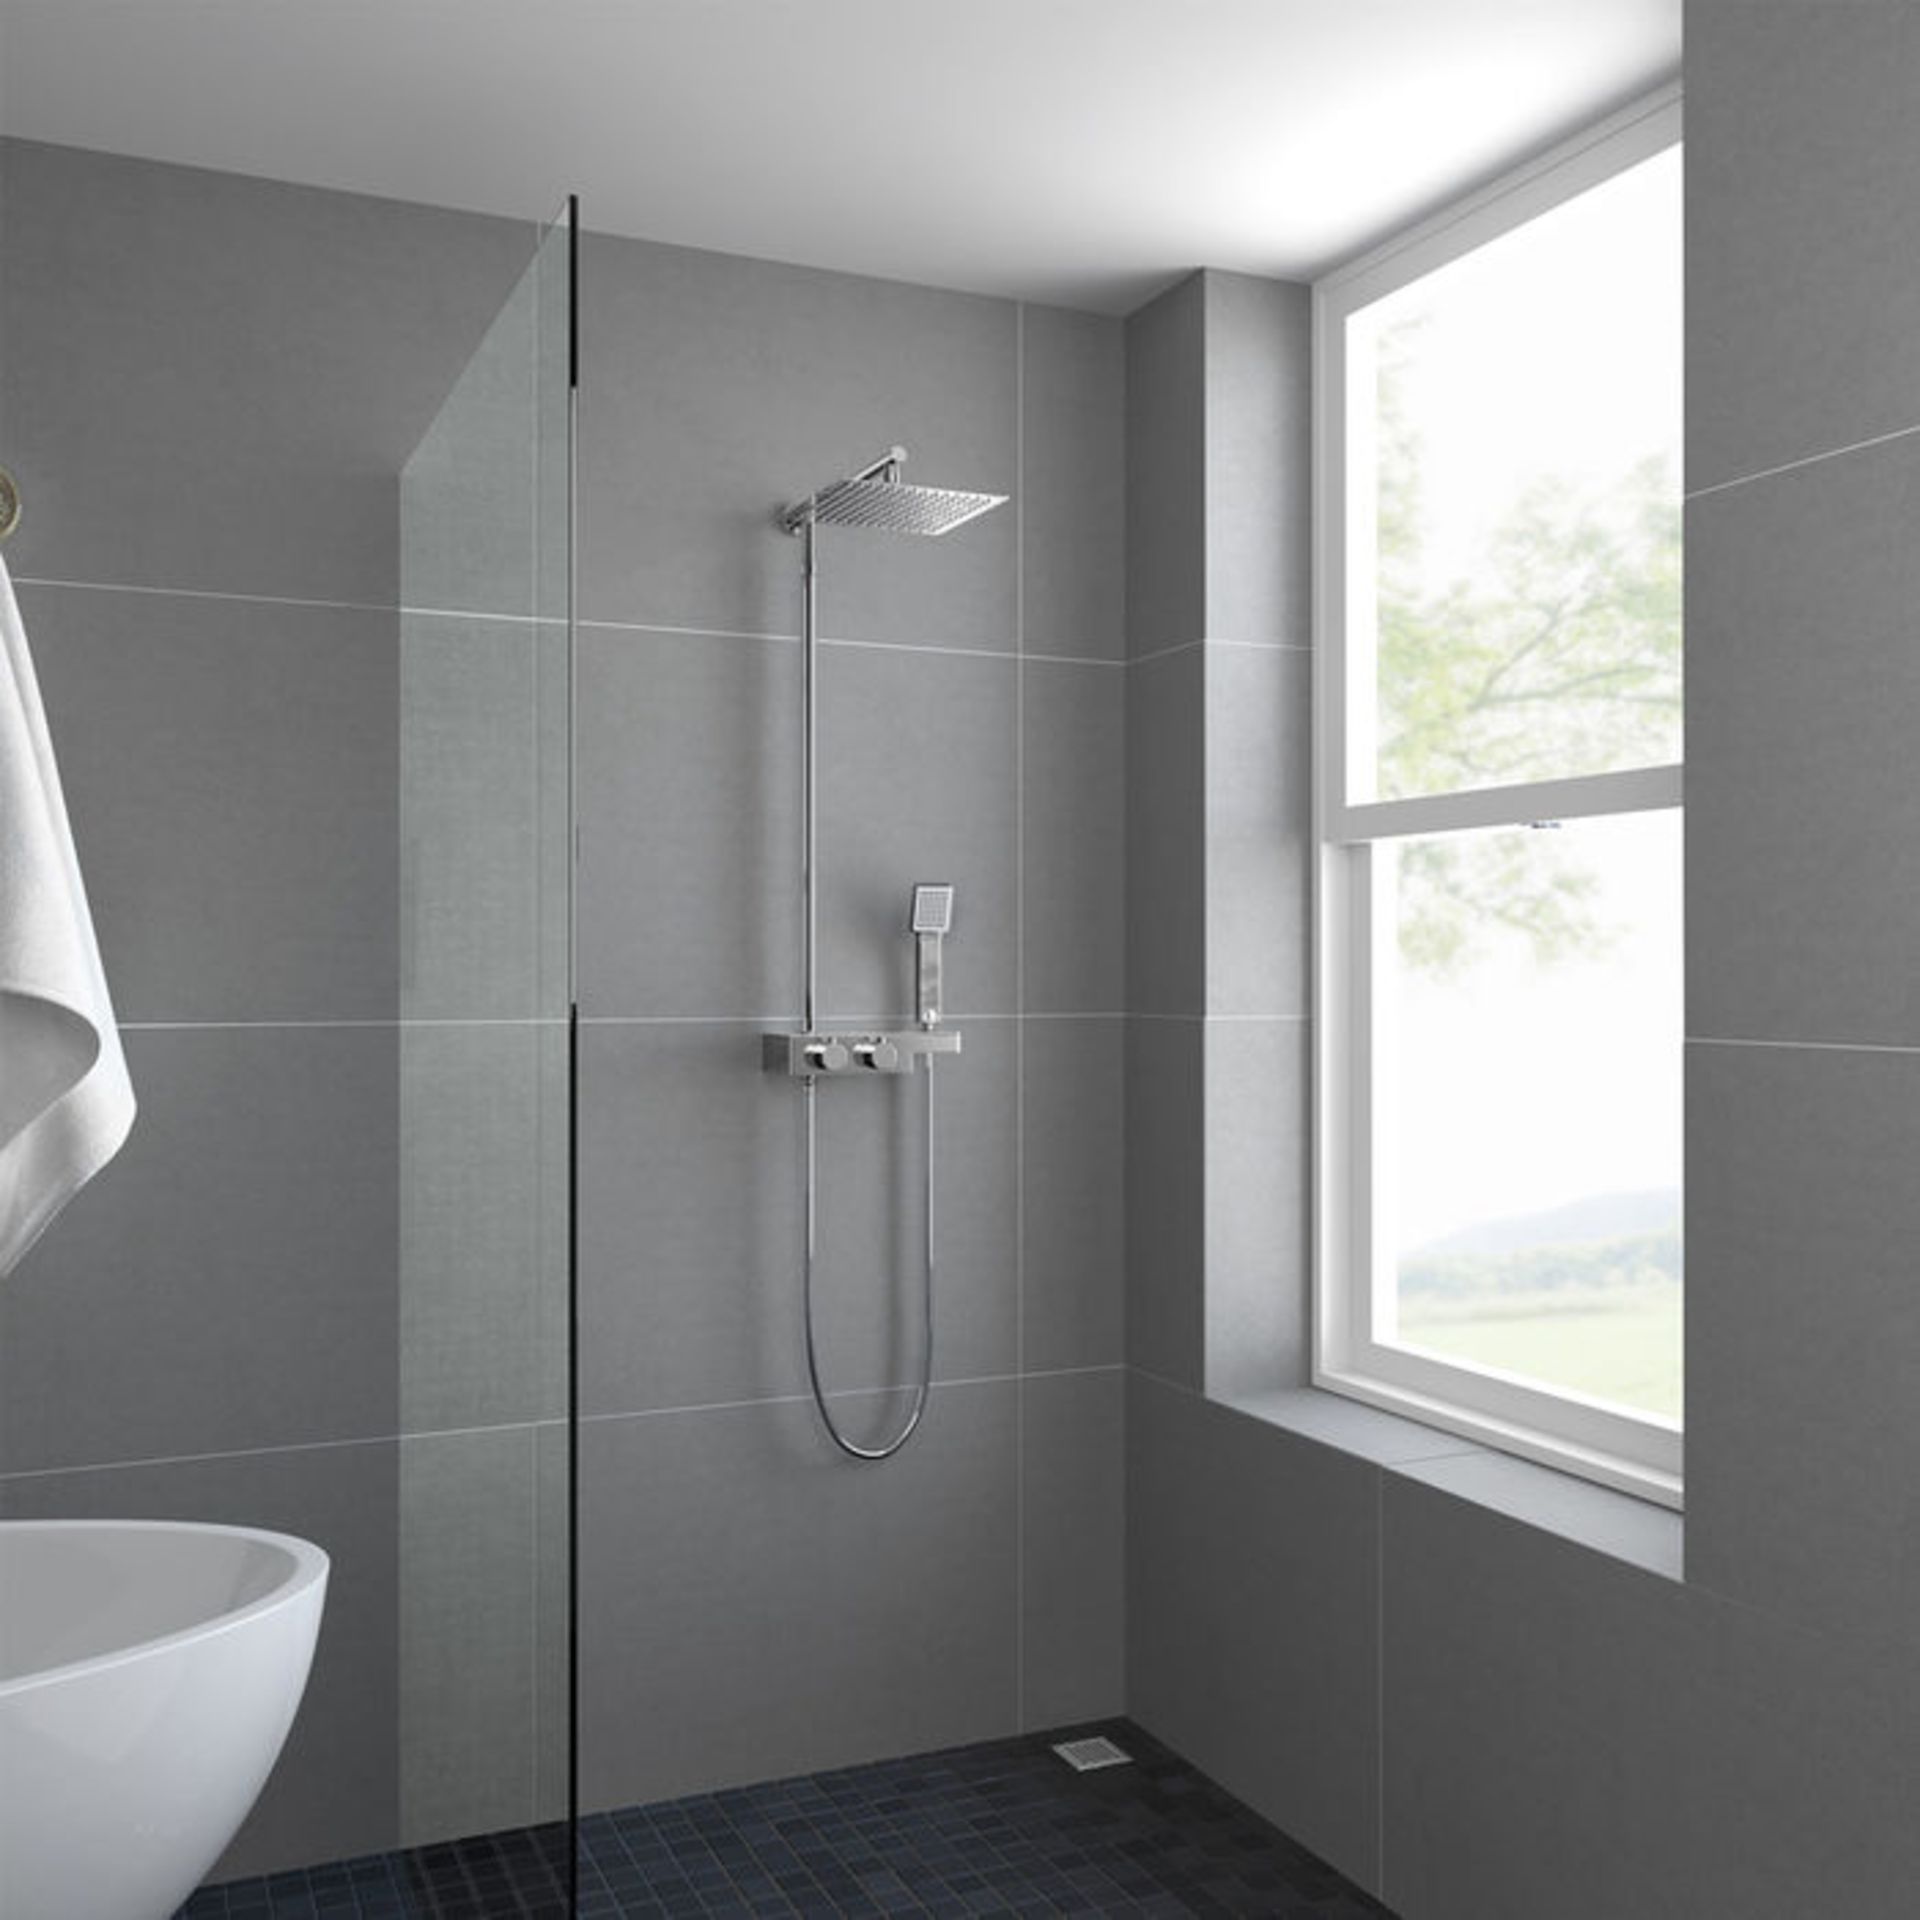 (MW42) Square Exposed Thermostatic Shower Shelf, Kit & Large Head. RRP £349.99. Style meets function - Image 4 of 4